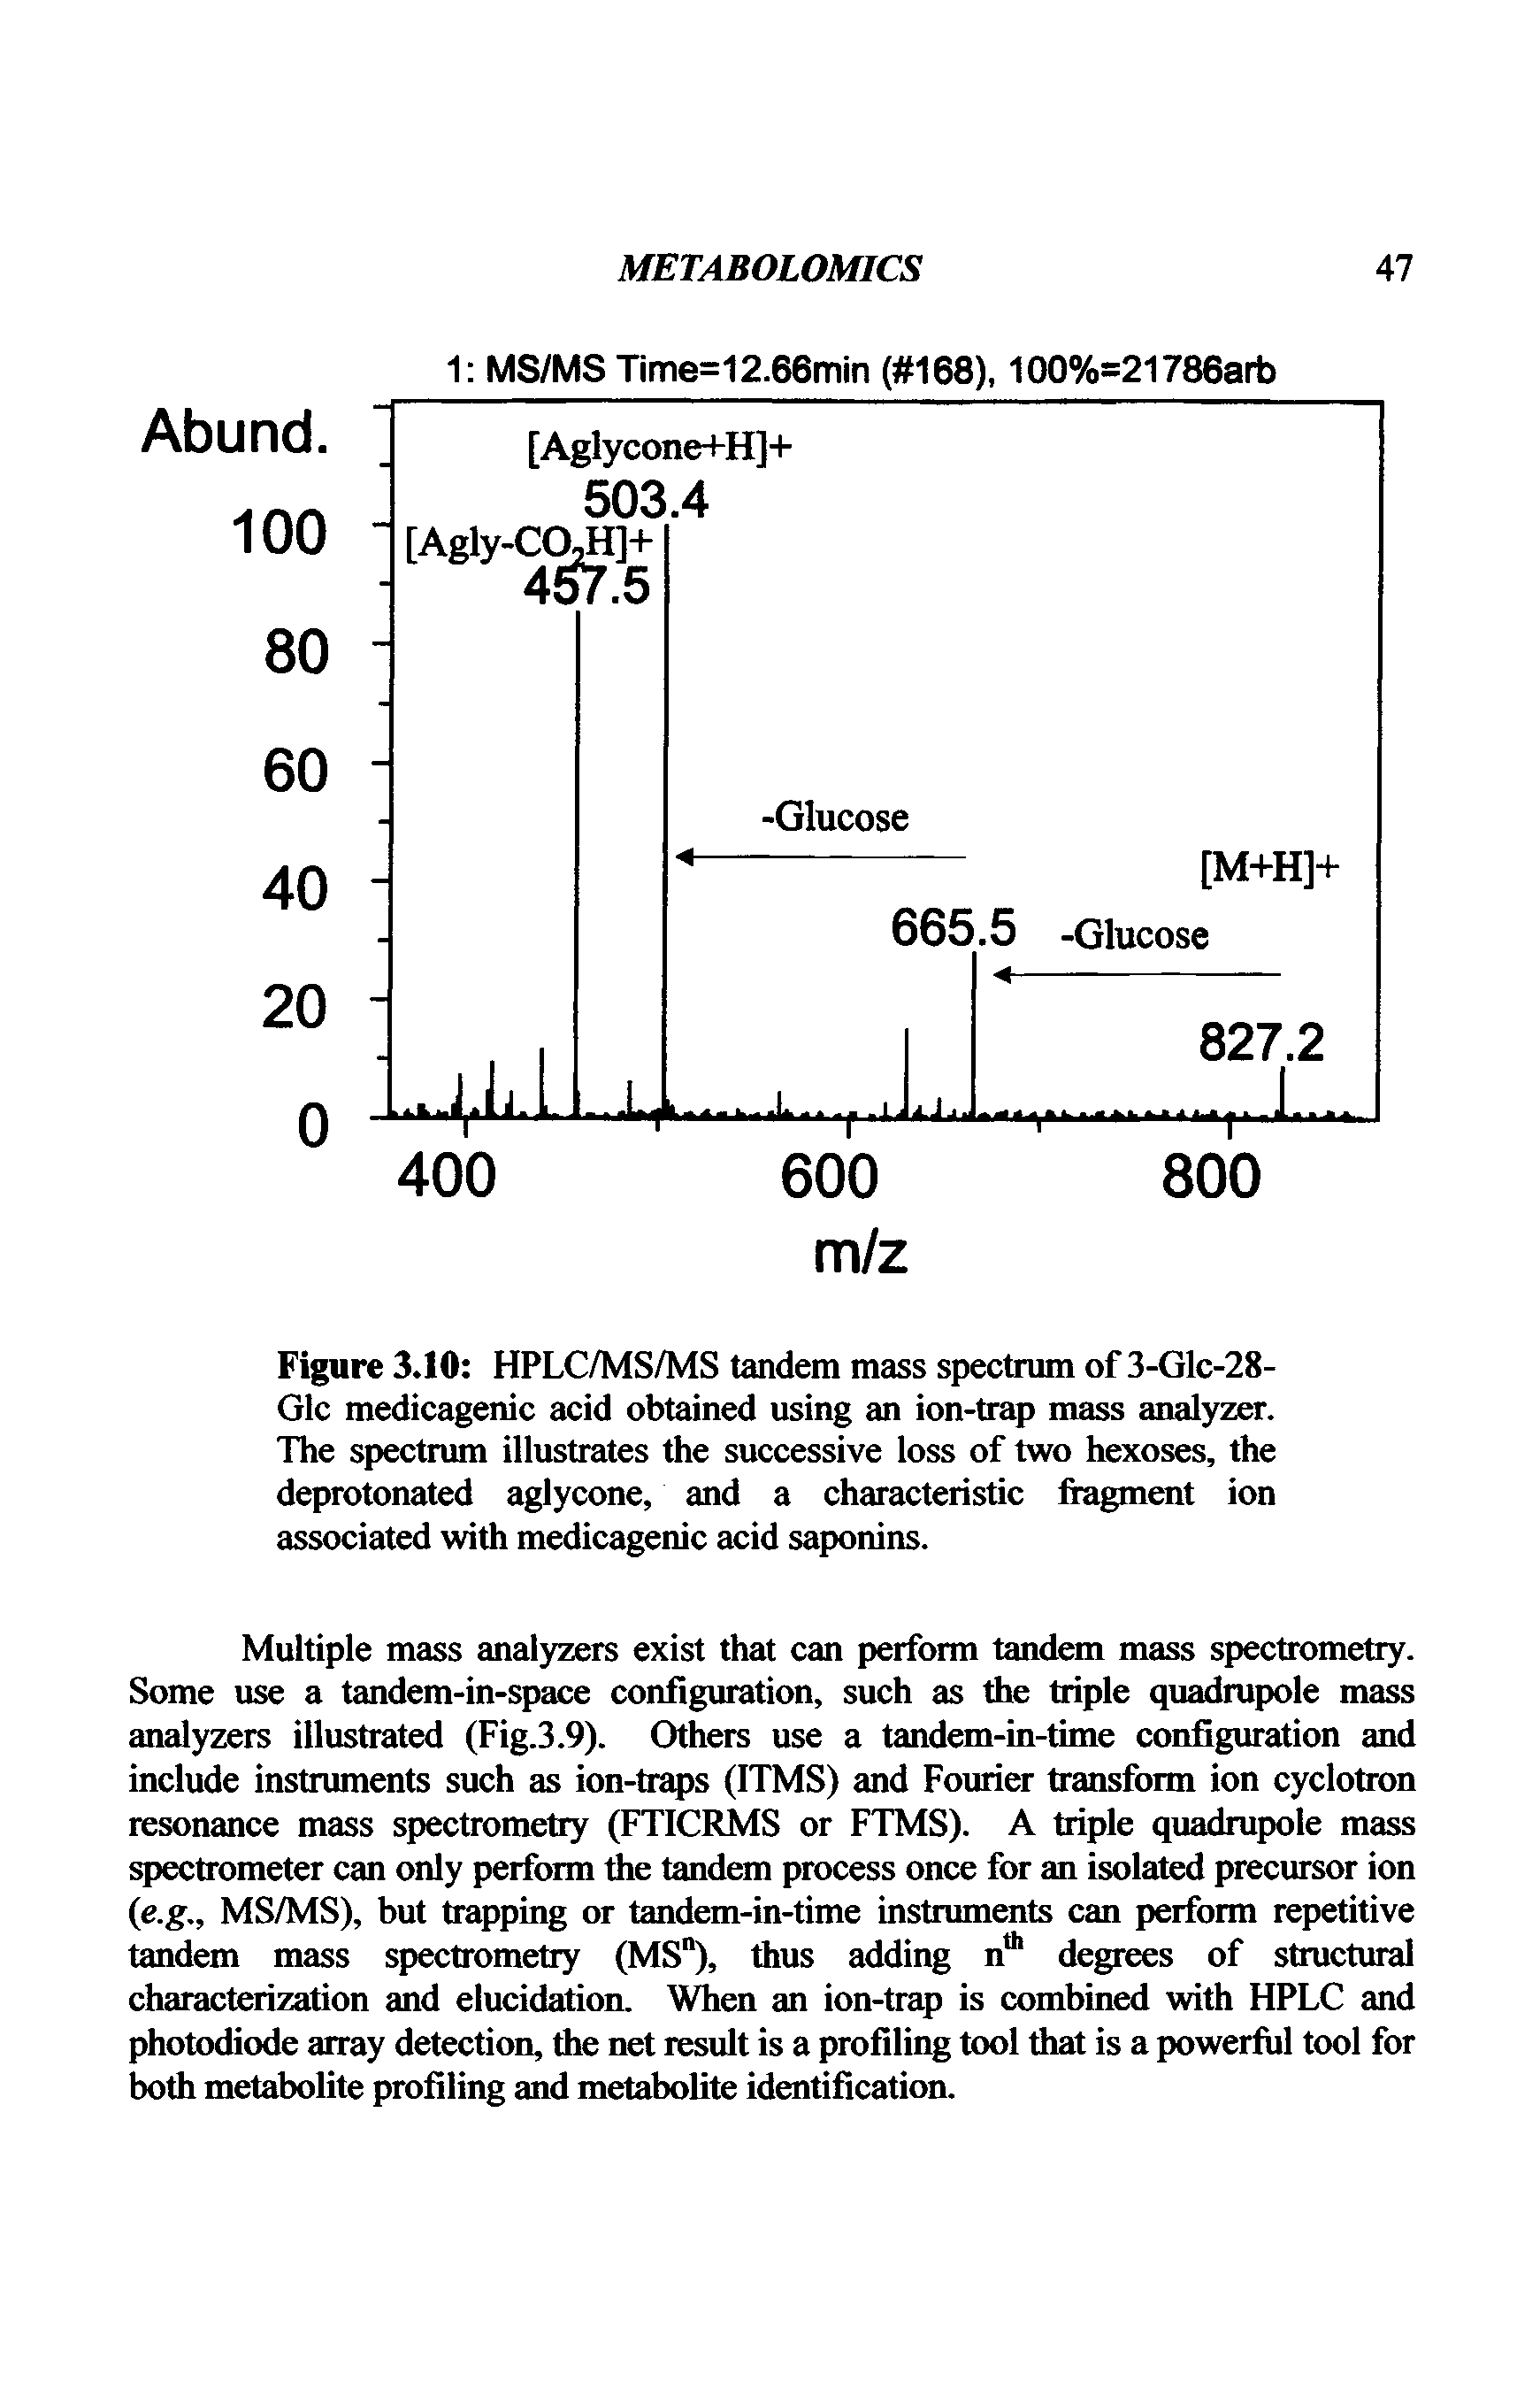 Figure 3.10 HPLC/MS/MS tandem mass spectrum of 3-Glc-28-Glc medicagenic acid obtained using an ion-trap mass analyzer. The spectrum illustrates the successive loss of two hexoses, the deprotonated aglycone, and a characteristic ftagment ion associated with medicagenic acid saponins.